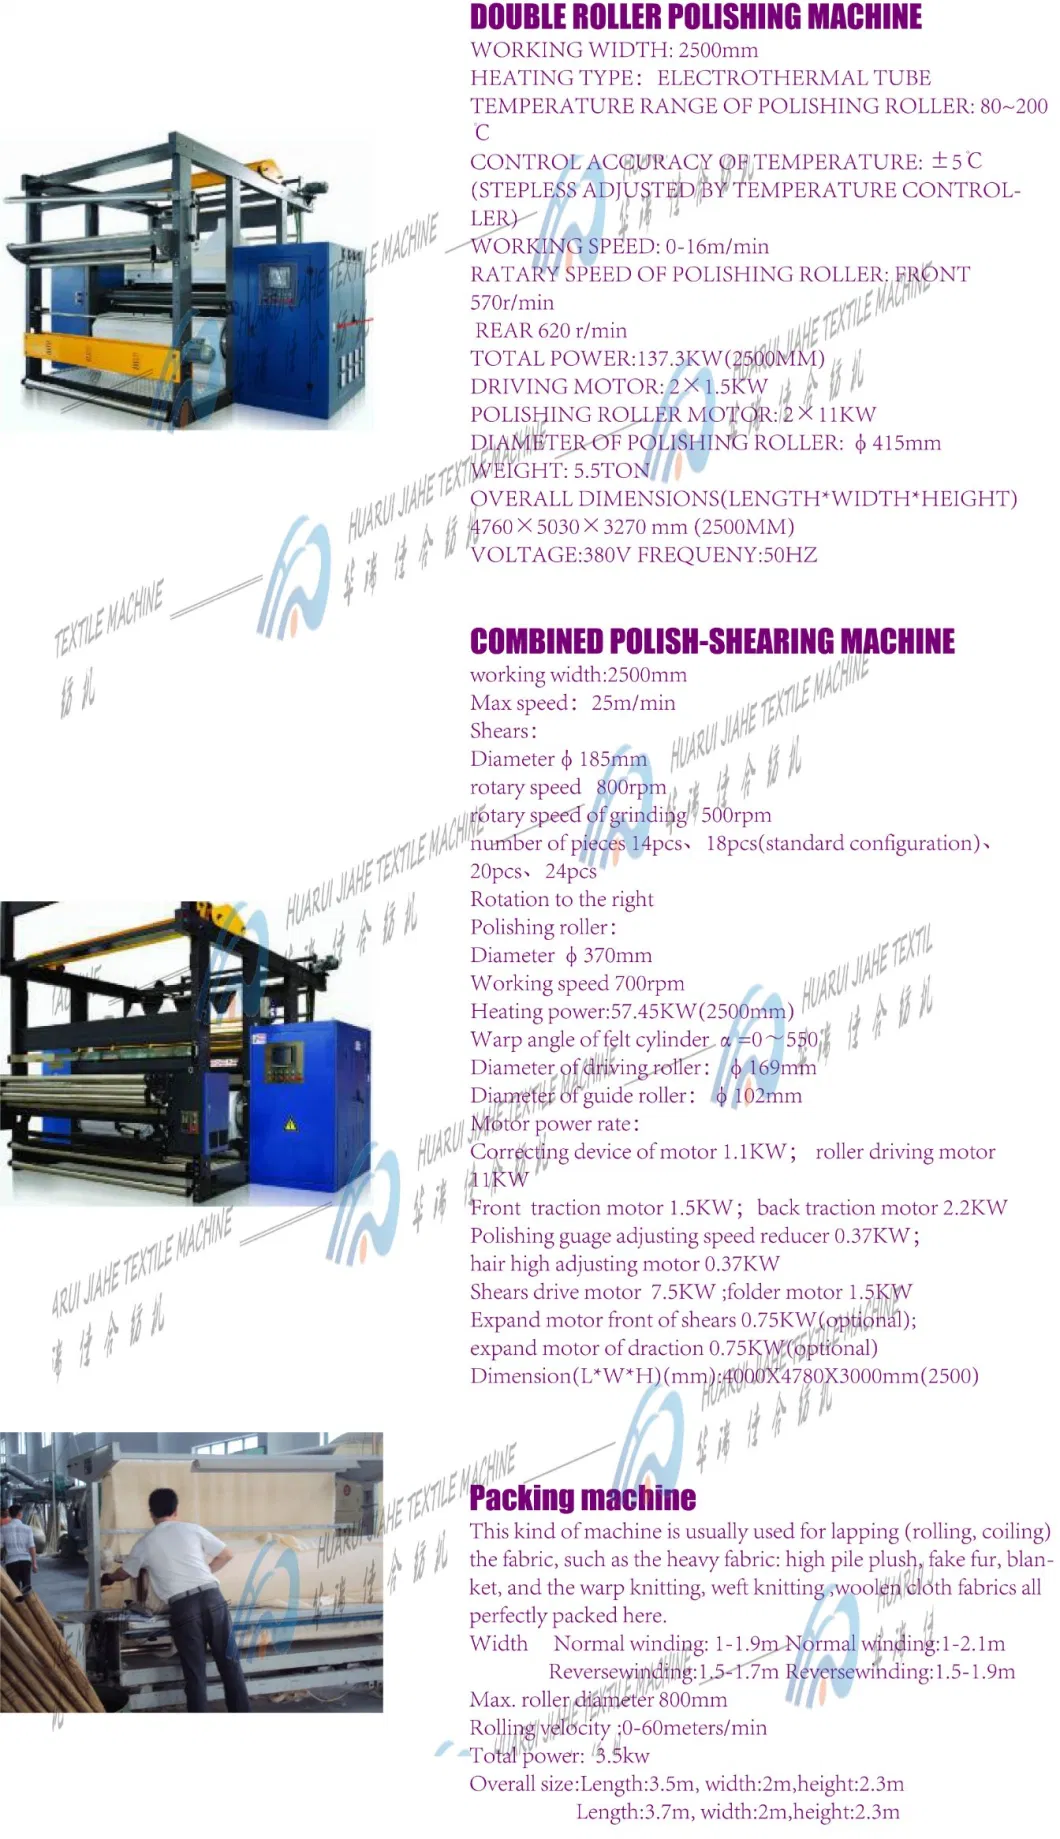 Burnout Machine to Shade The Colors for Burnout Fabric by The Special Chemical, The Color Tip Discharge After- Finish Textile Machinery